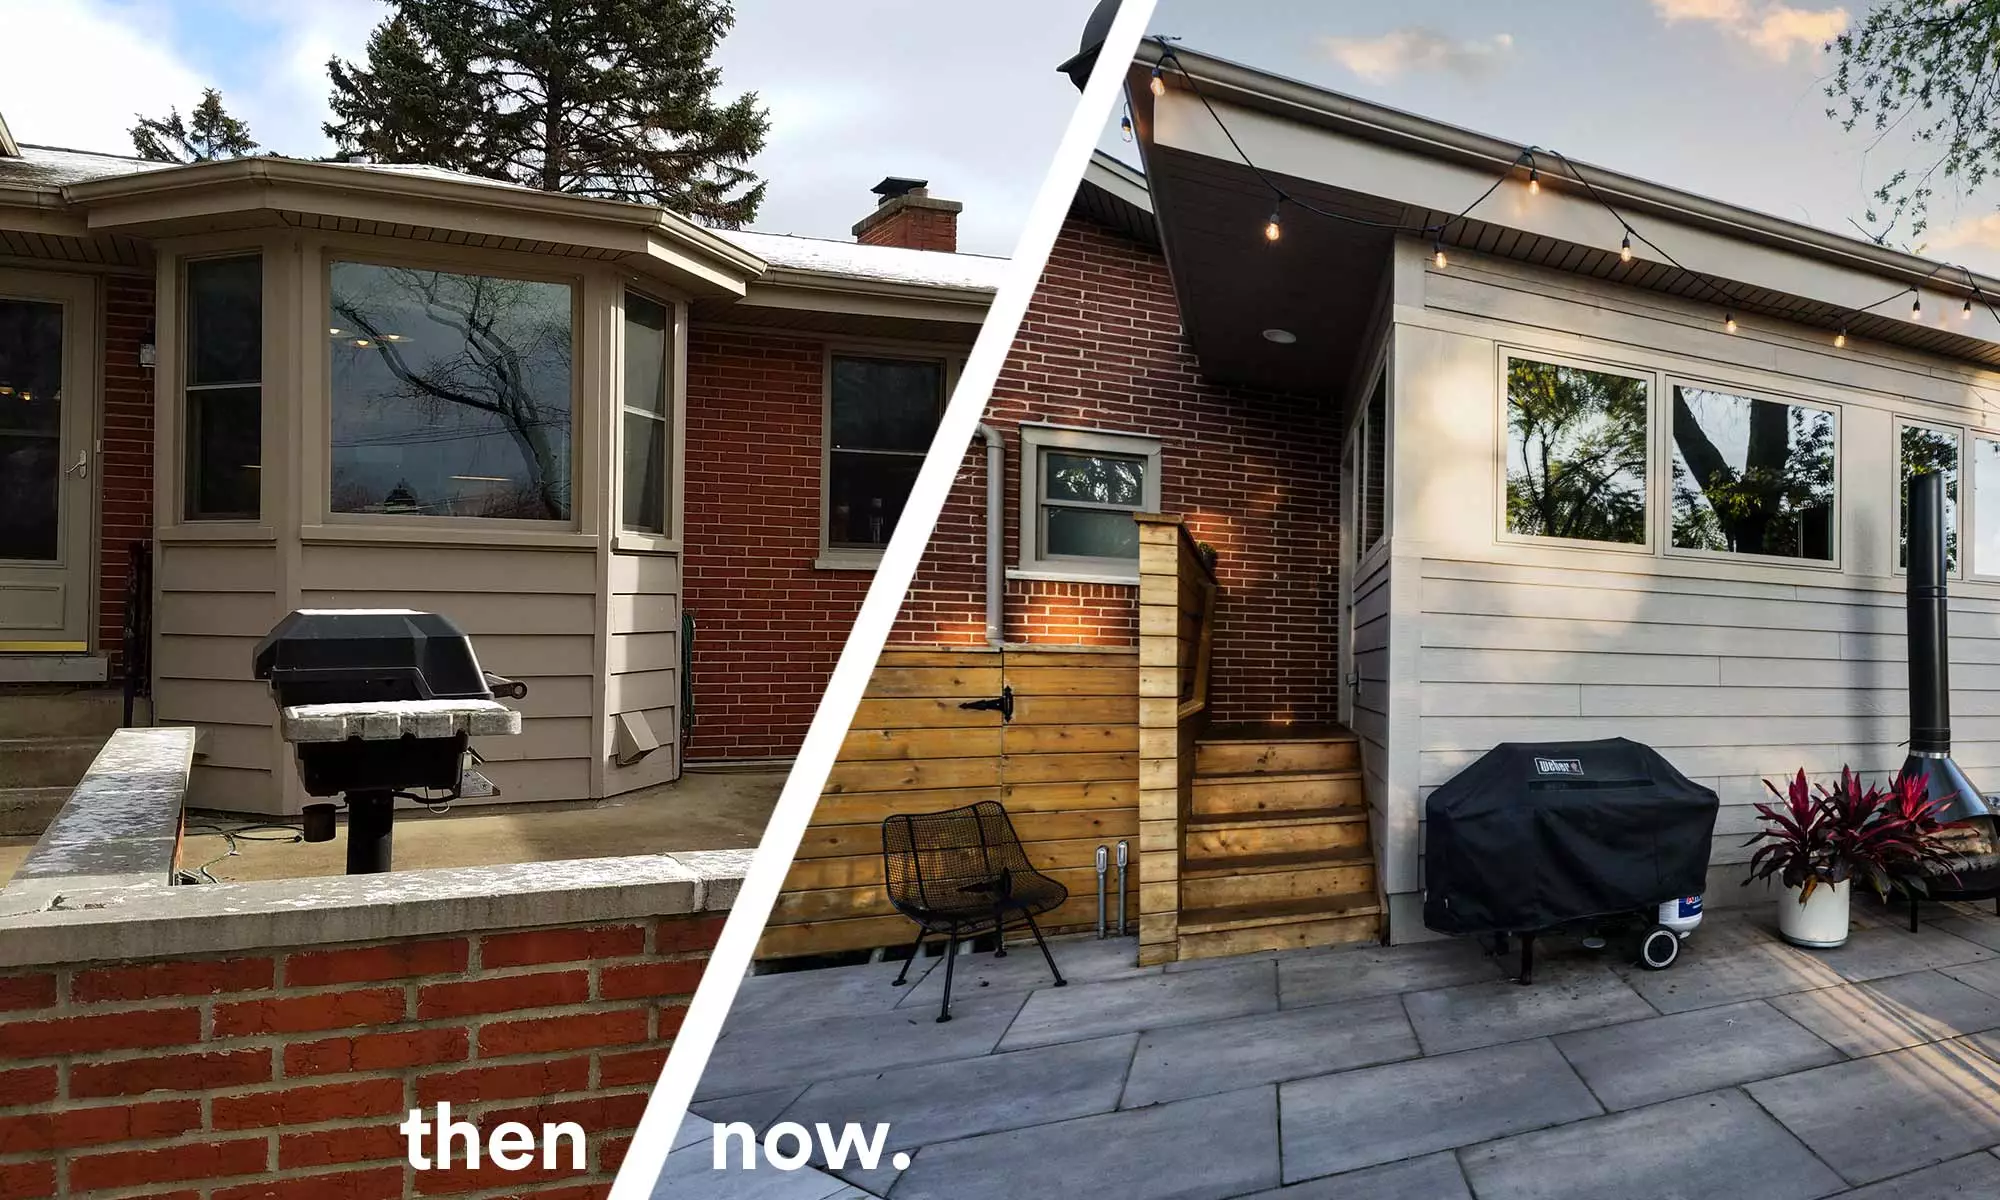 Before and After exterior view of a mid century modern kitchen addition